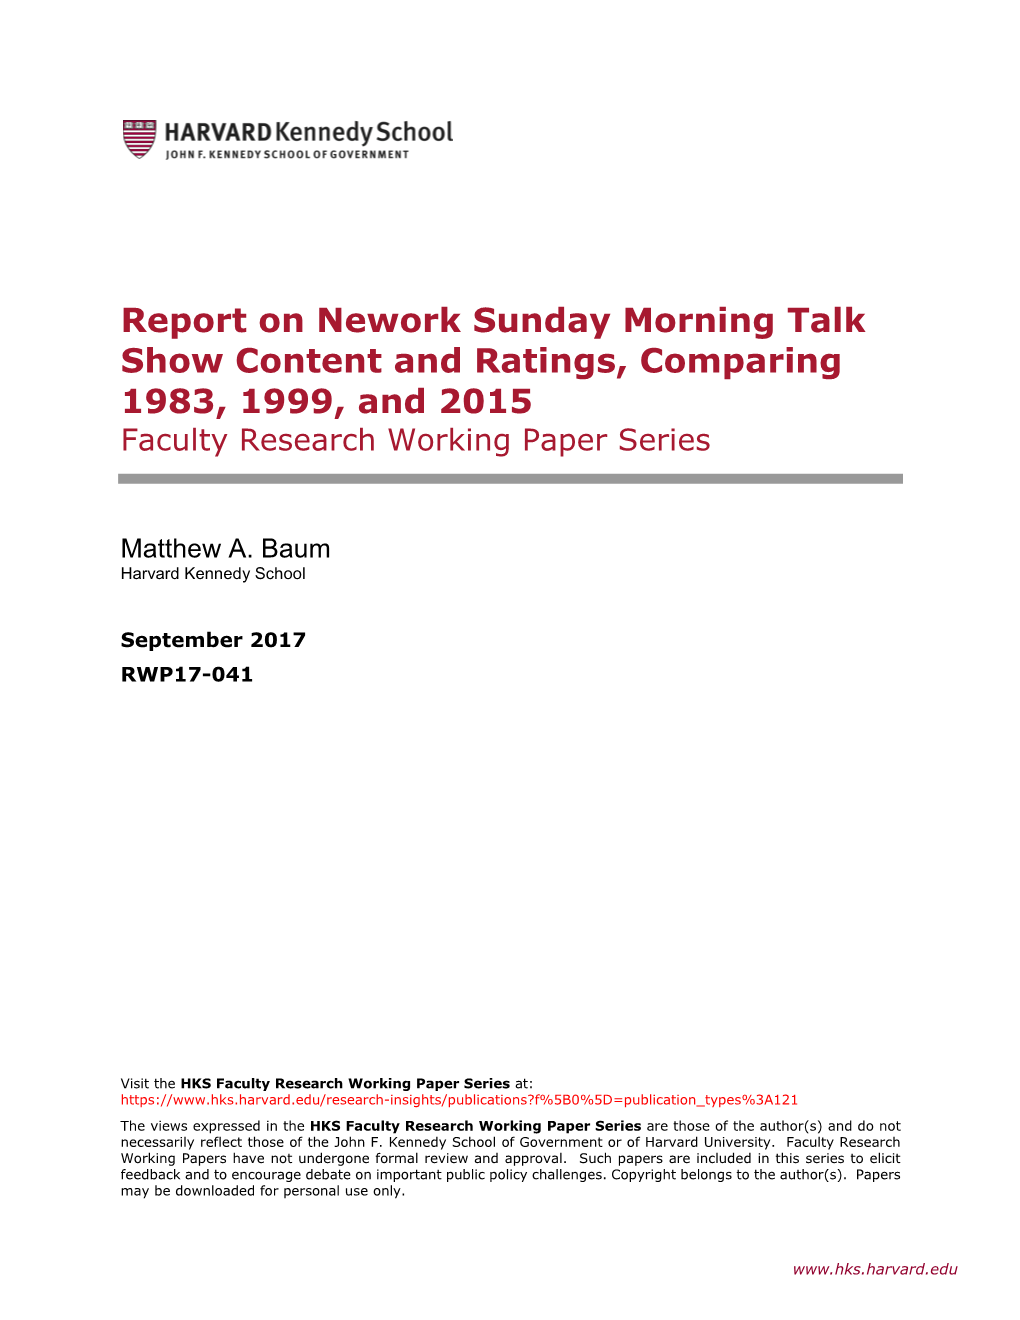 Report on Nework Sunday Morning Talk Show Content and Ratings, Comparing 1983, 1999, and 2015 Faculty Research Working Paper Series